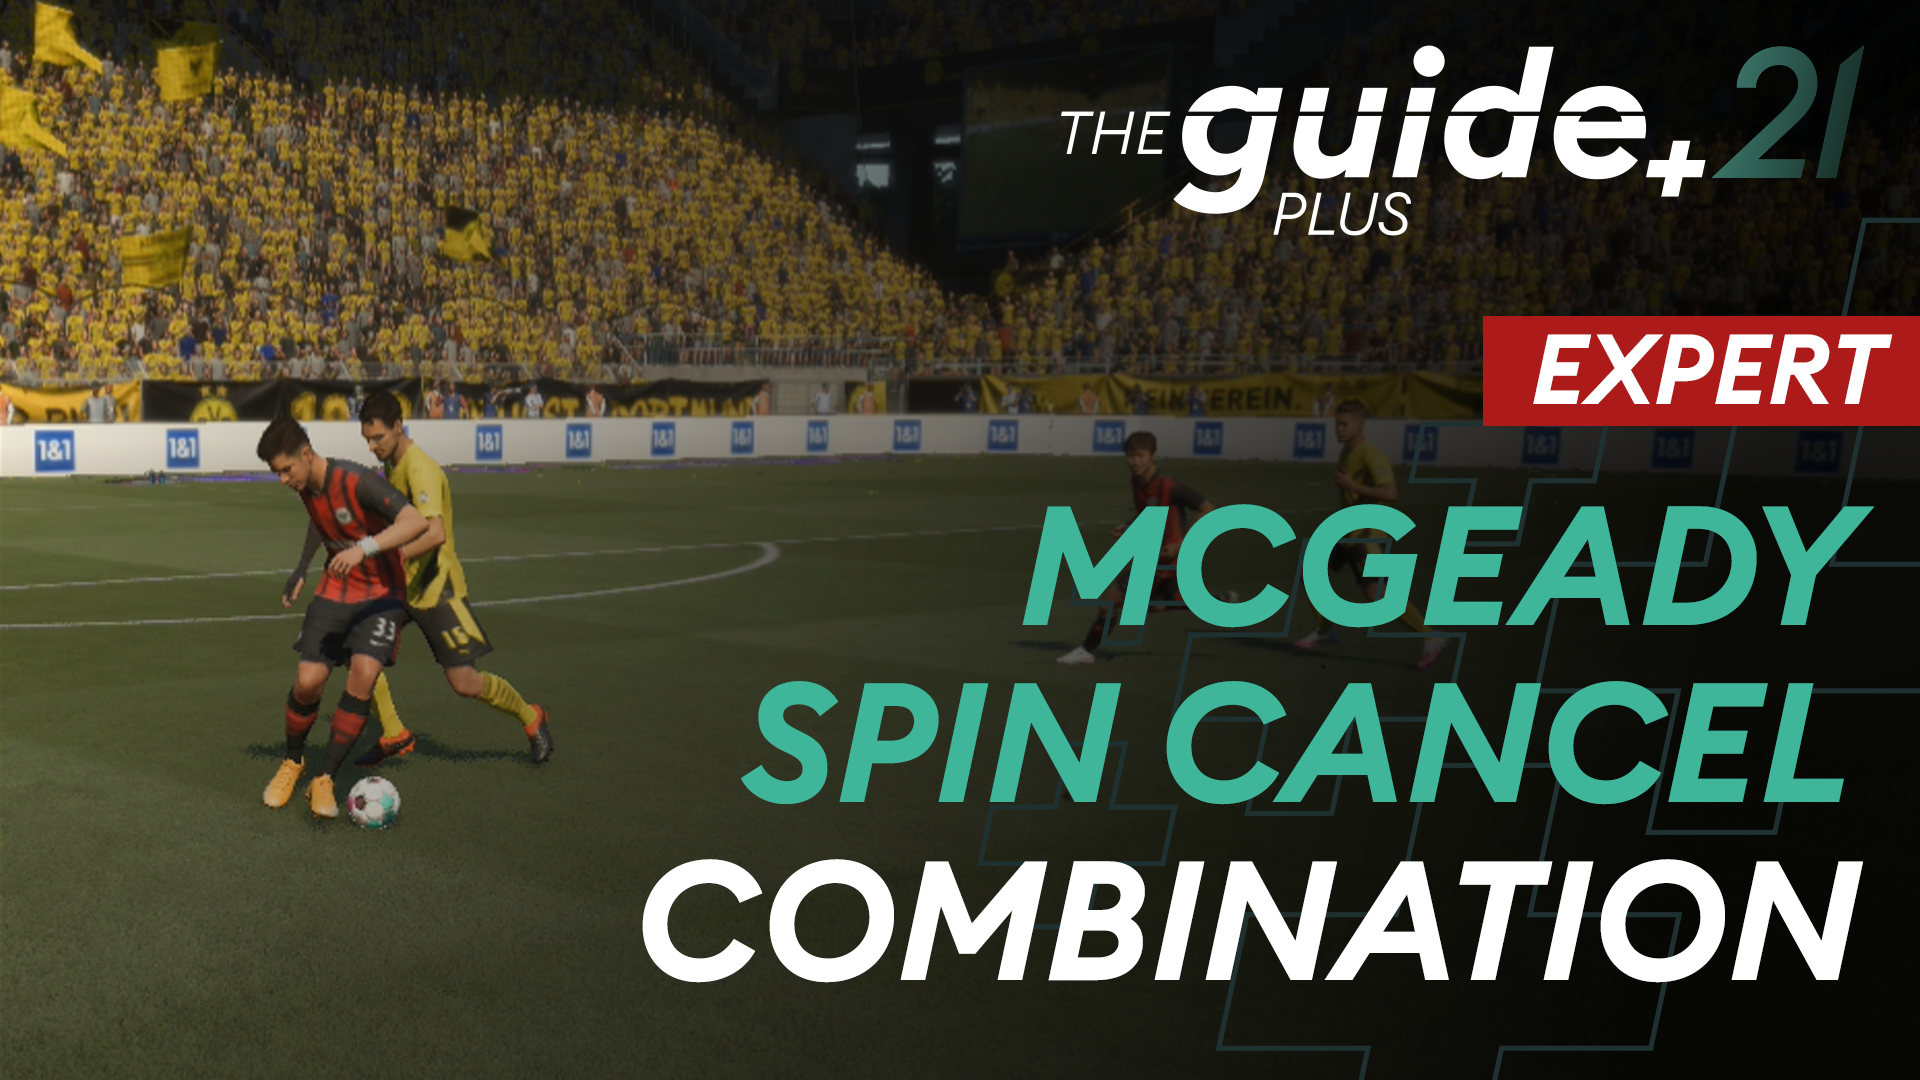 McGeady Spin Cancel – A very effective skill move to change direction